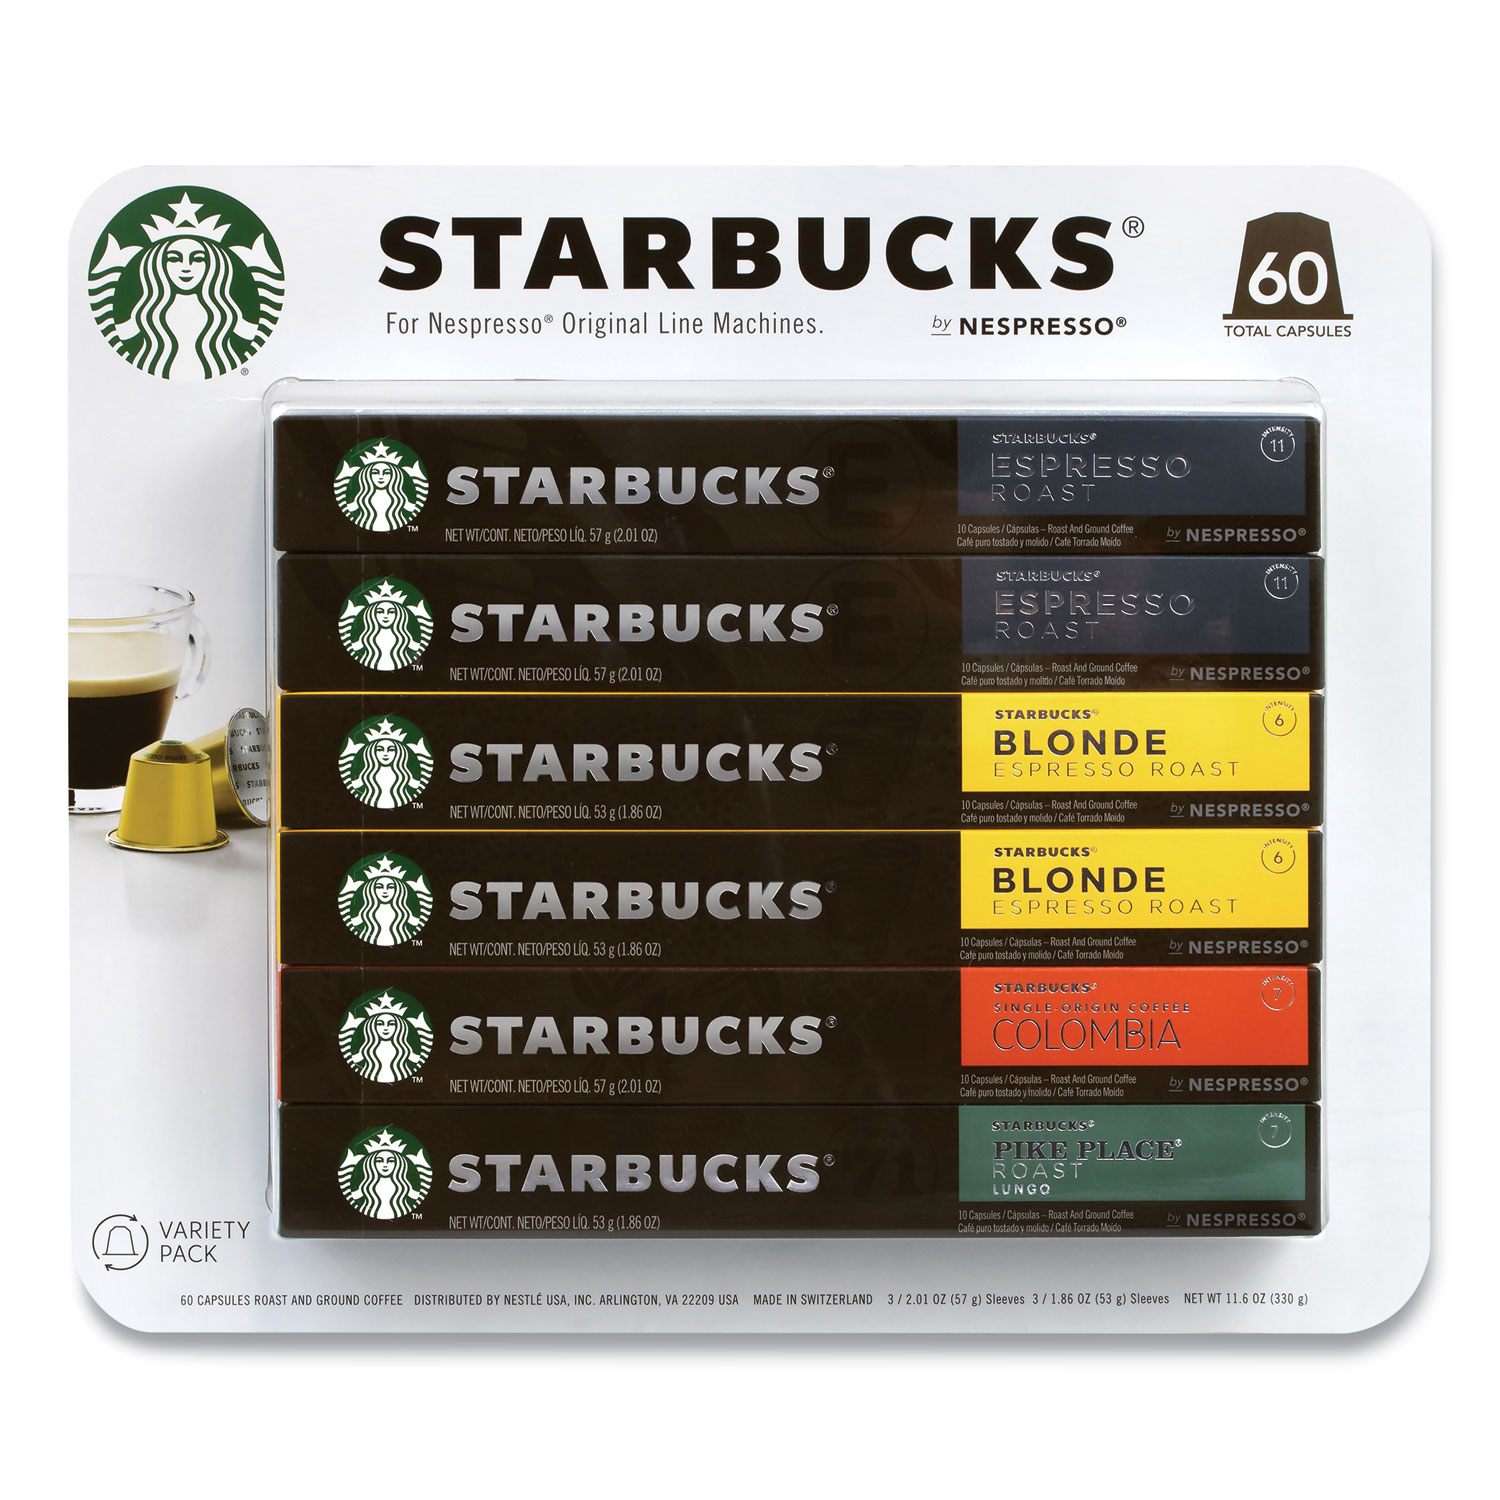  Starbucks By NESPRESSO 51529 Pods Variety Pack, Blonde Espresso/Colombia/Espresso/Pikes Place, 60 Pods/Pack, Free Delivery in 1-4 Business Days (GRR22001153) 